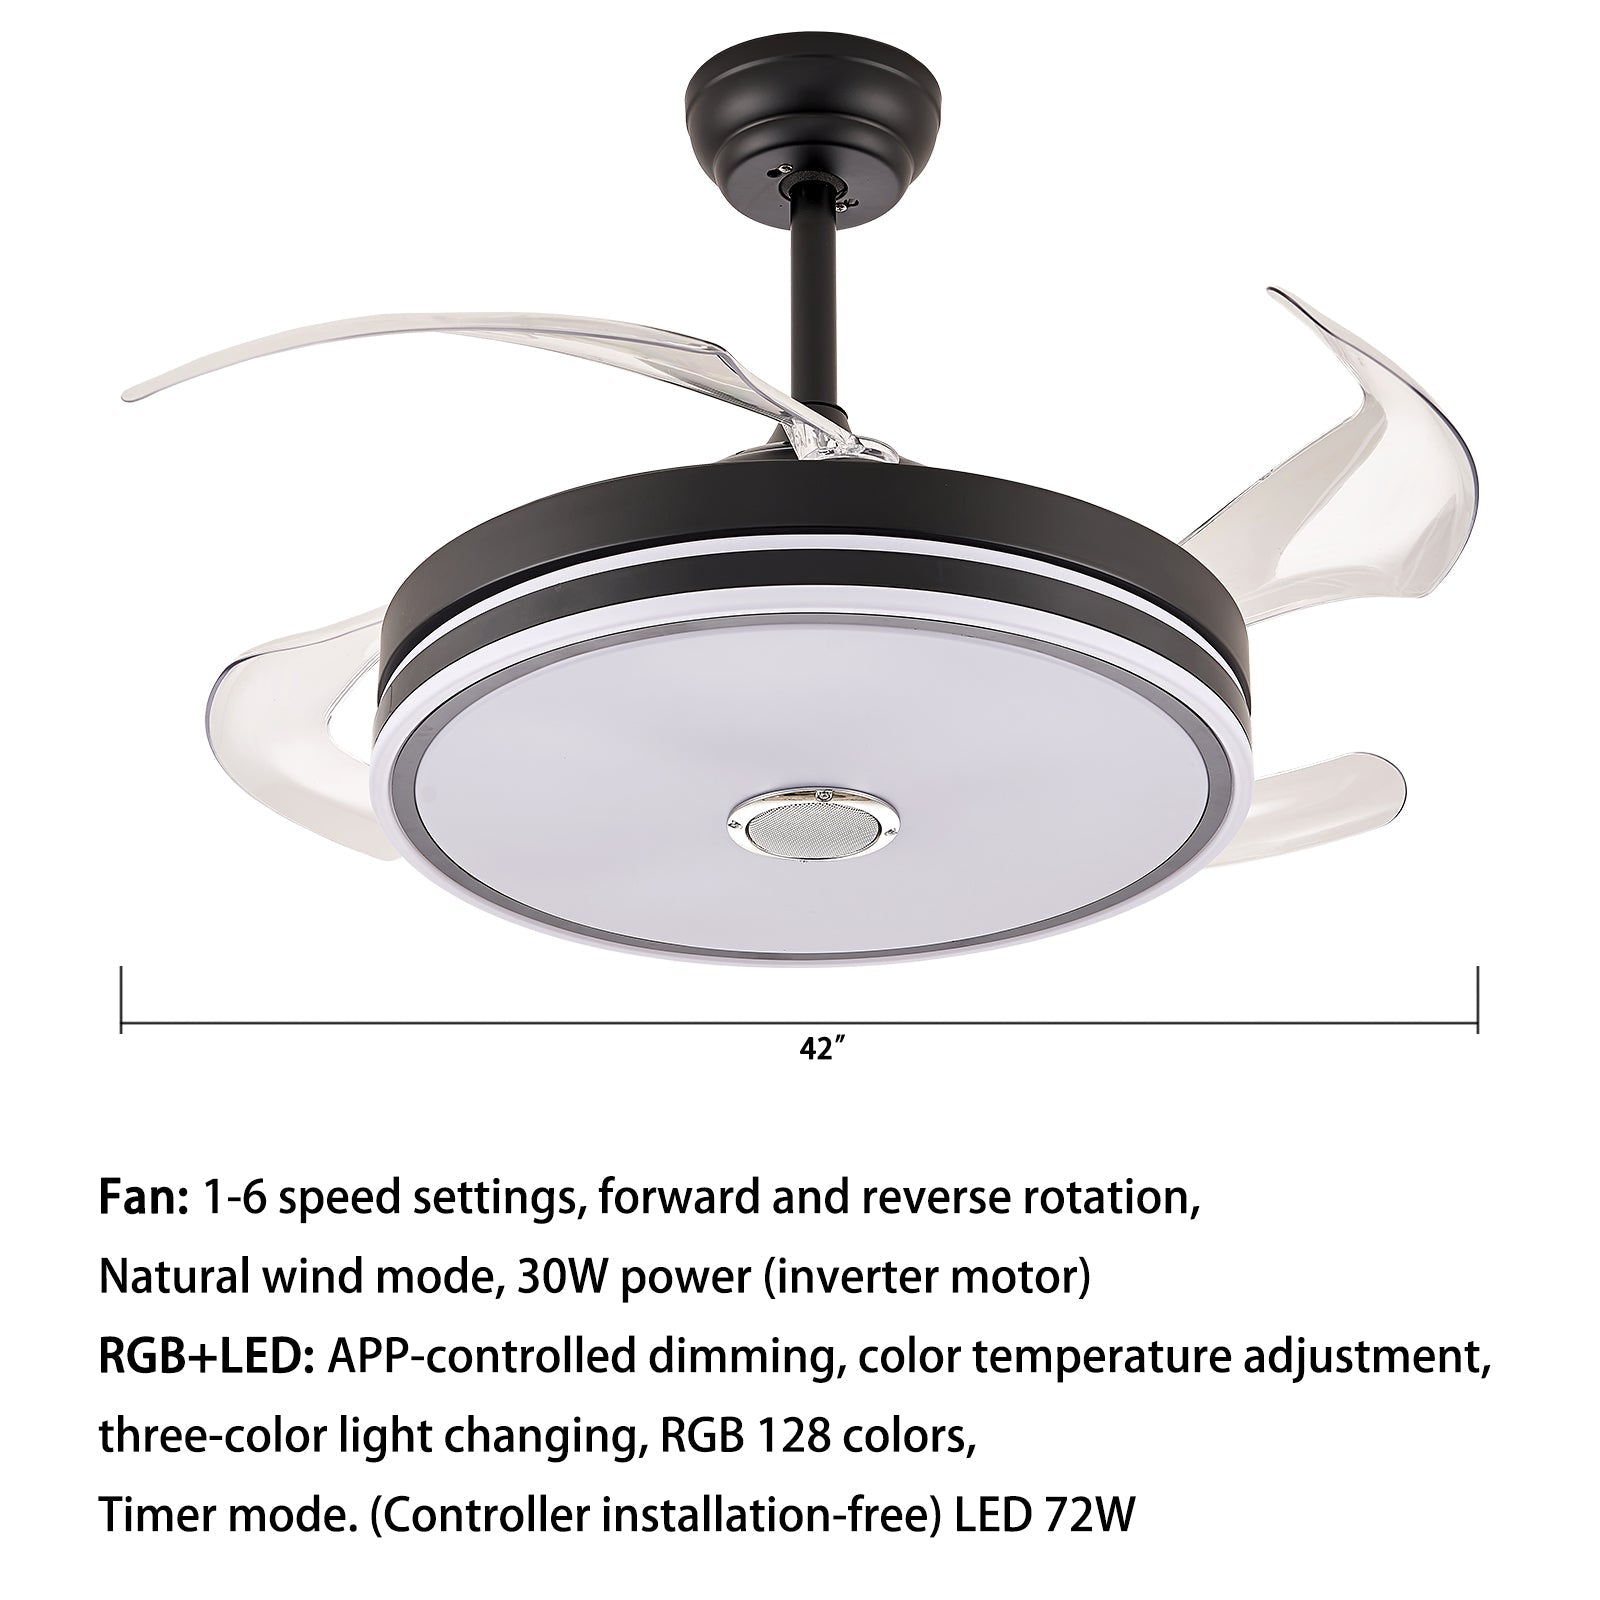 Xenia 42" Smart Ceiling Fan 6-Speed Adjustable With LED Light Chandelier Over Dining Table